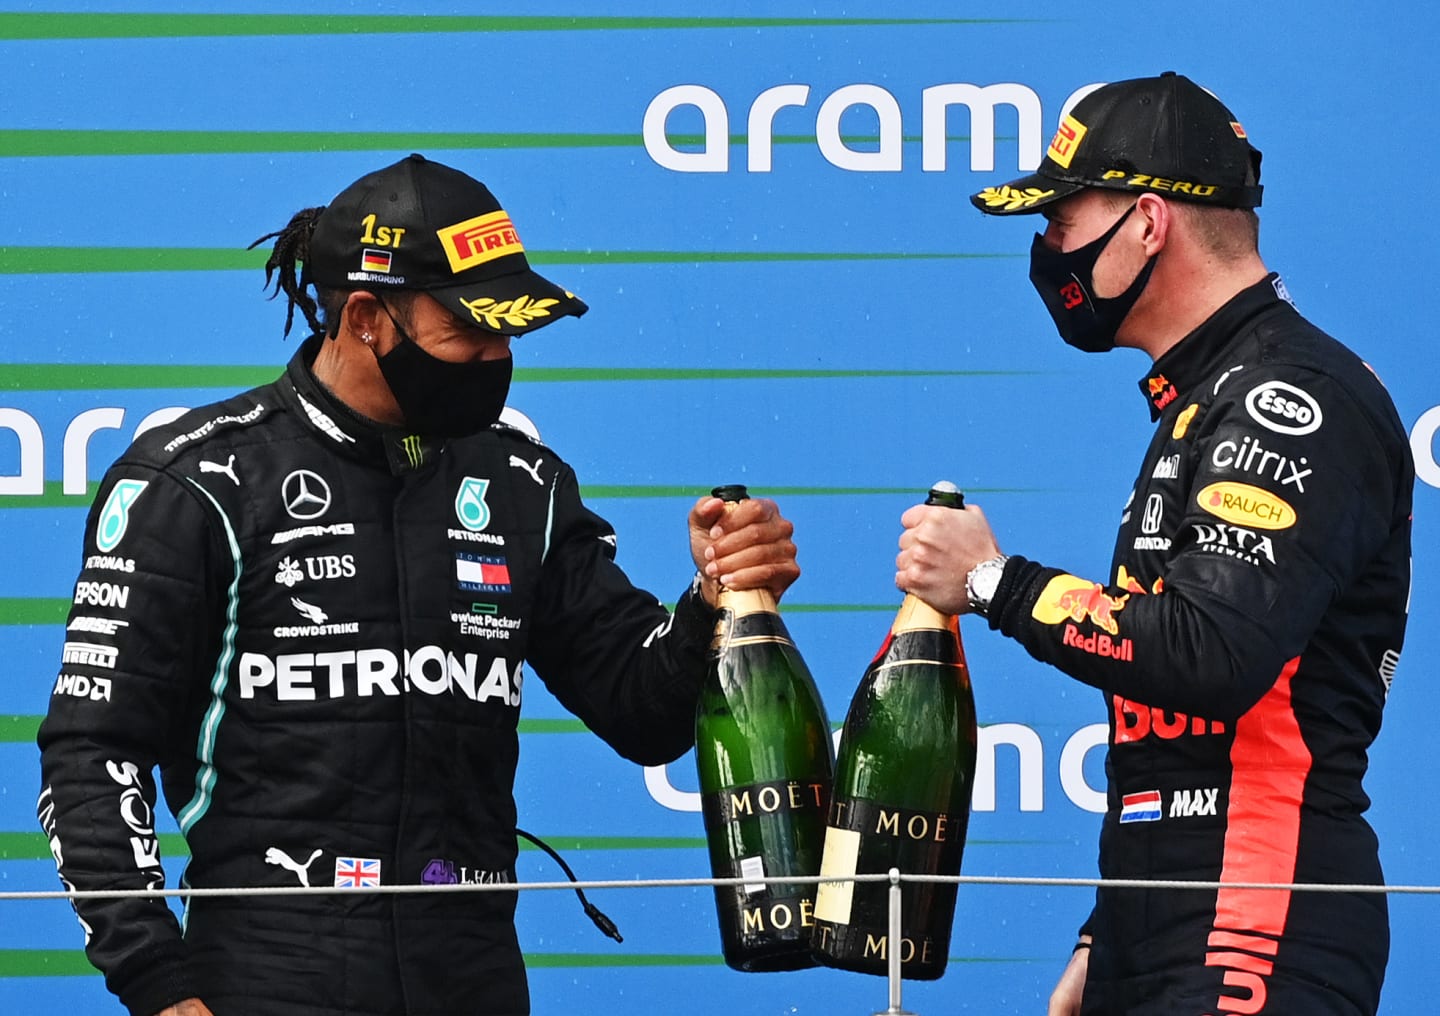 NUERBURG, GERMANY - OCTOBER 11: Race winner Lewis Hamilton of Great Britain and Mercedes GP and second placed Max Verstappen of Netherlands and Red Bull Racing celebrate on the podium during the F1 Eifel Grand Prix at Nuerburgring on October 11, 2020 in Nuerburg, Germany. (Photo by Ina Fassbender - Pool/Getty Images)